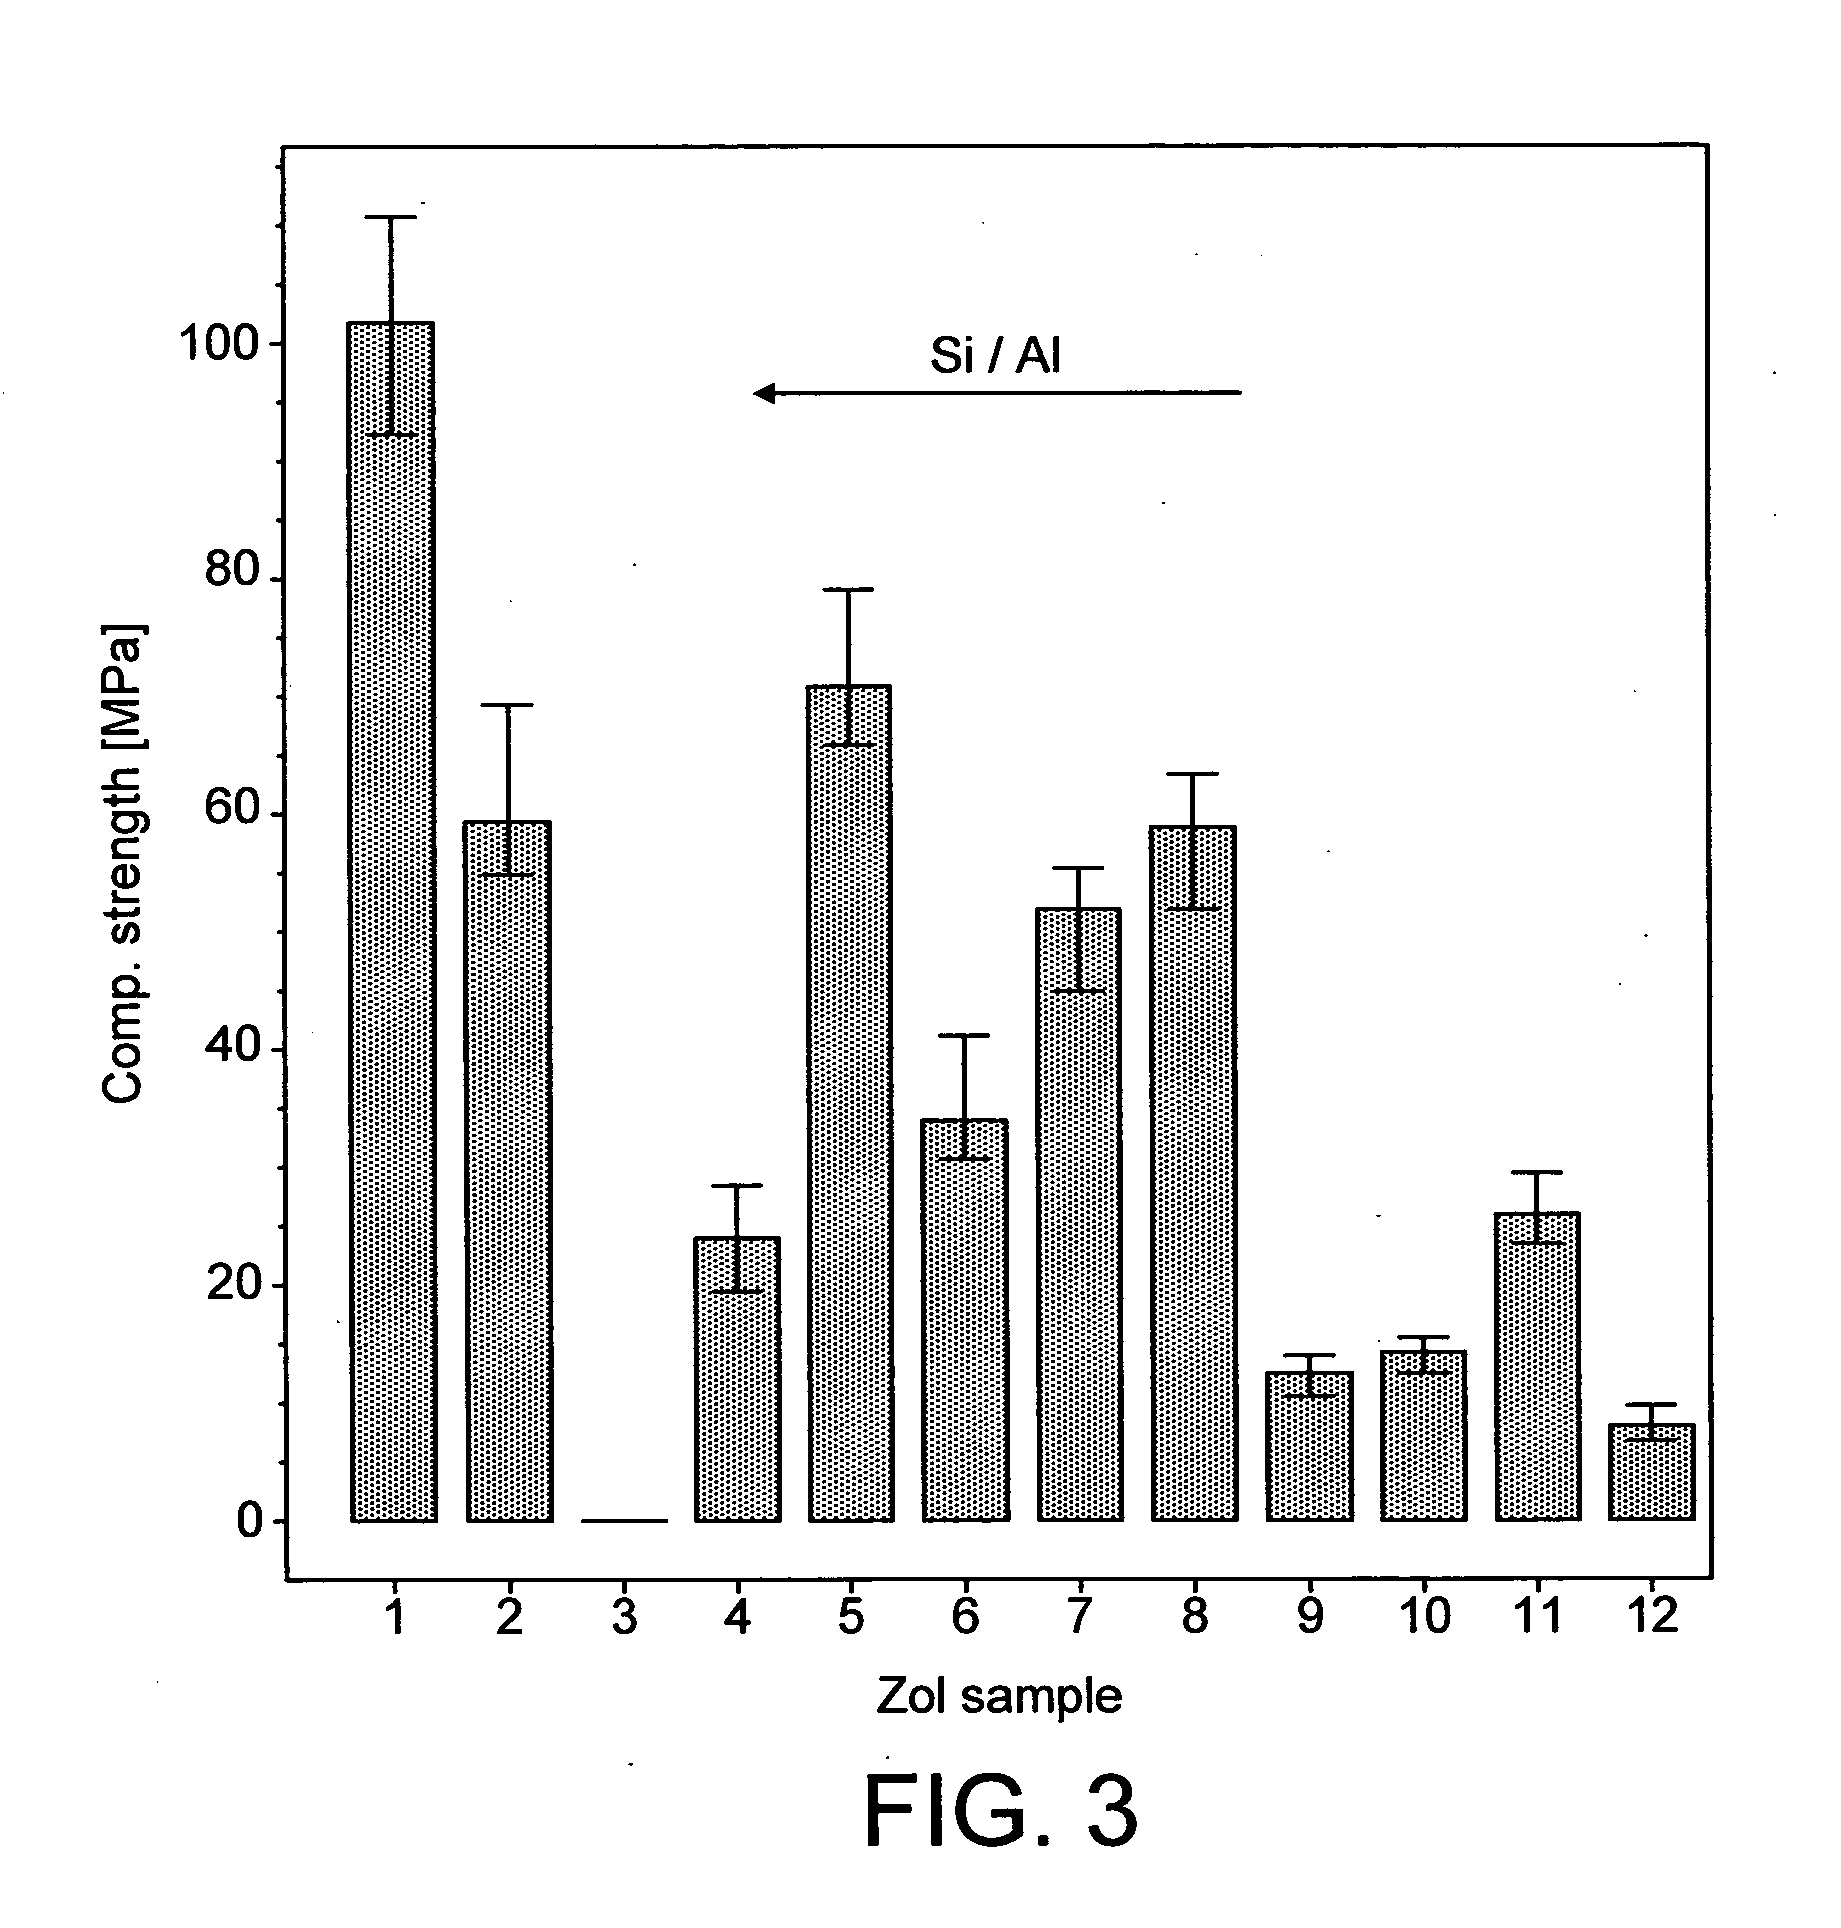 Composition for sustained drug delivery comprising geopolymeric binder